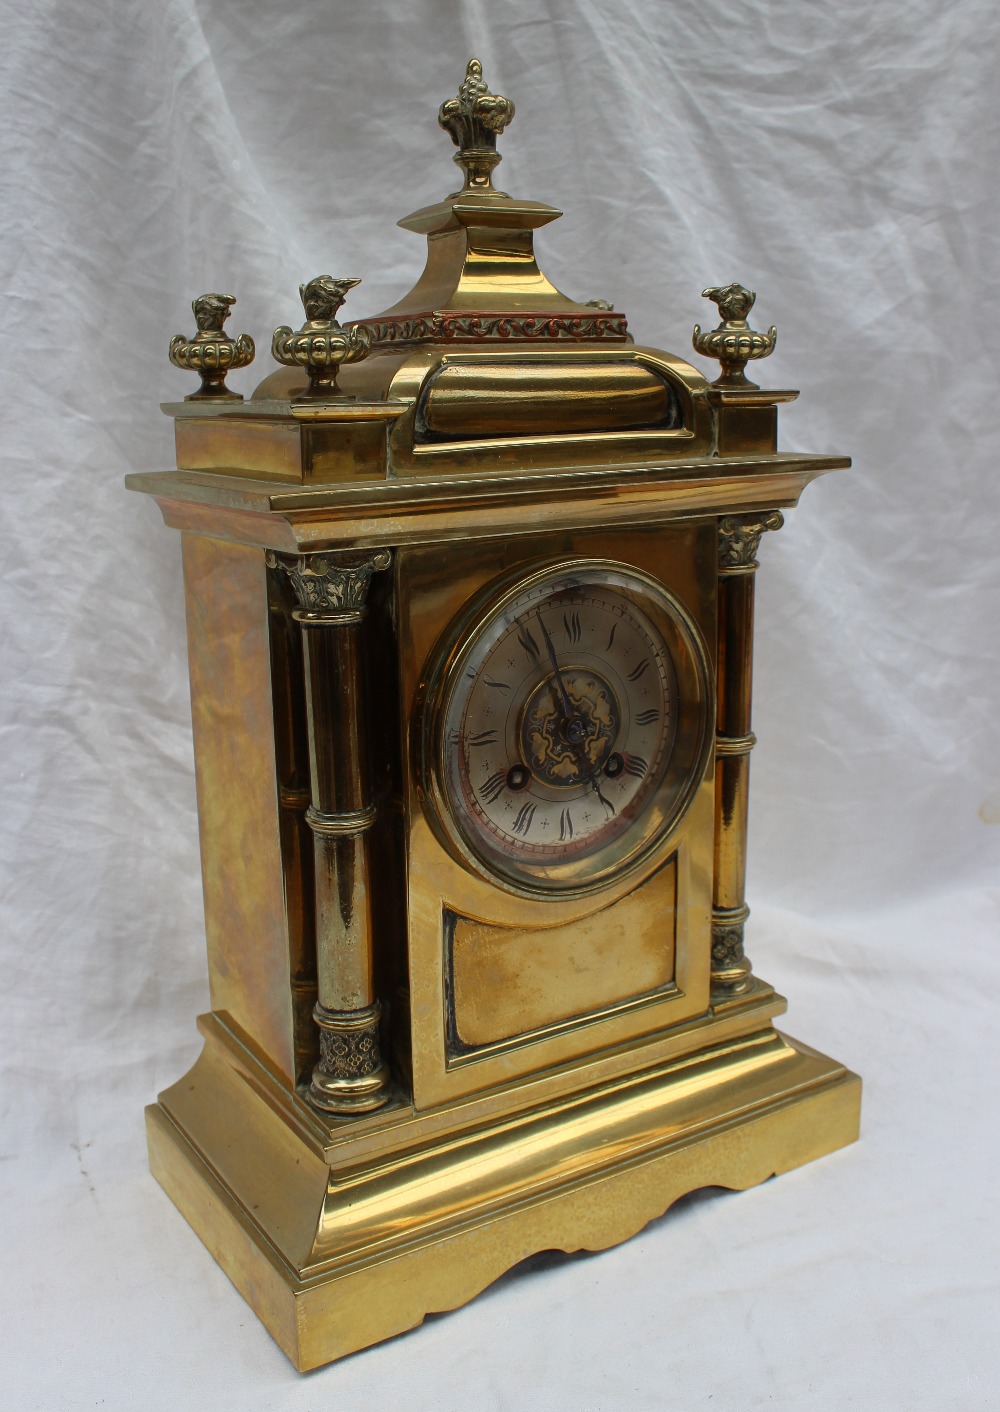 A 19th century brass mantle clock, with a domed top and flame finials, - Image 2 of 8